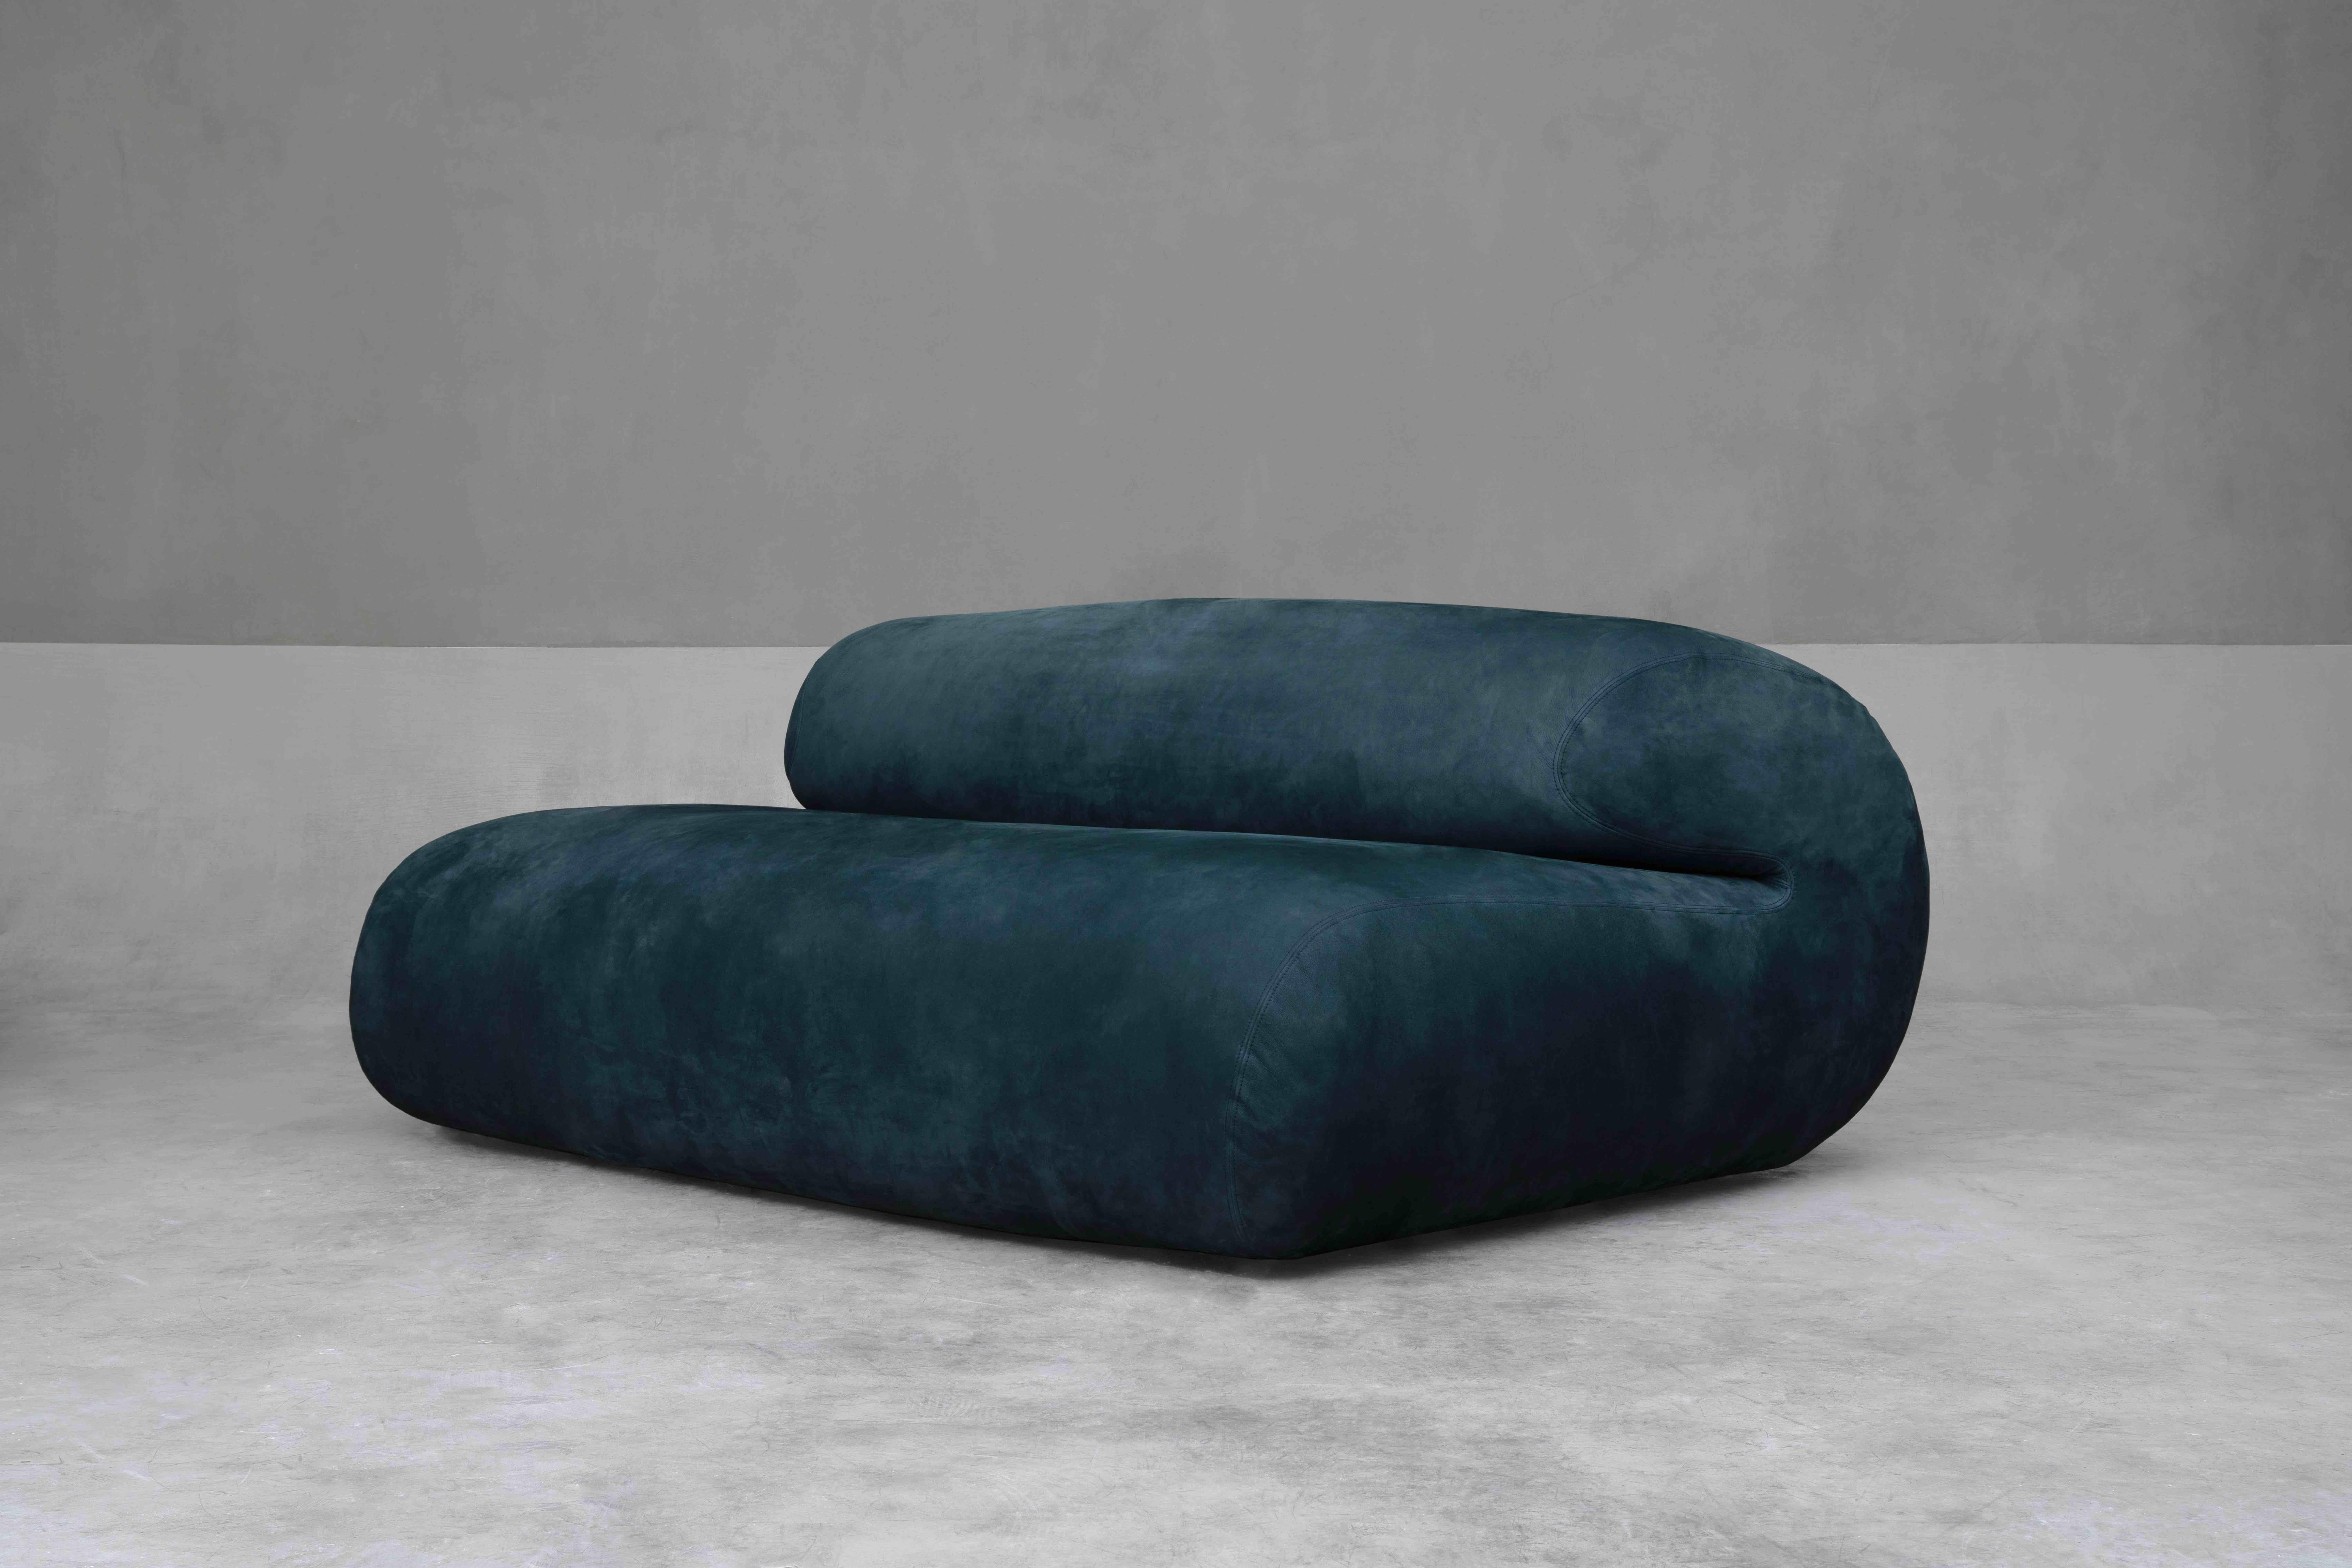 The Strata is a two-seater sofa deep with a distinct expression of relaxation. It is a simplistic yet bold movement balancing the inner force of upholstery with the external forces of gravity, which results in a shape that could be the